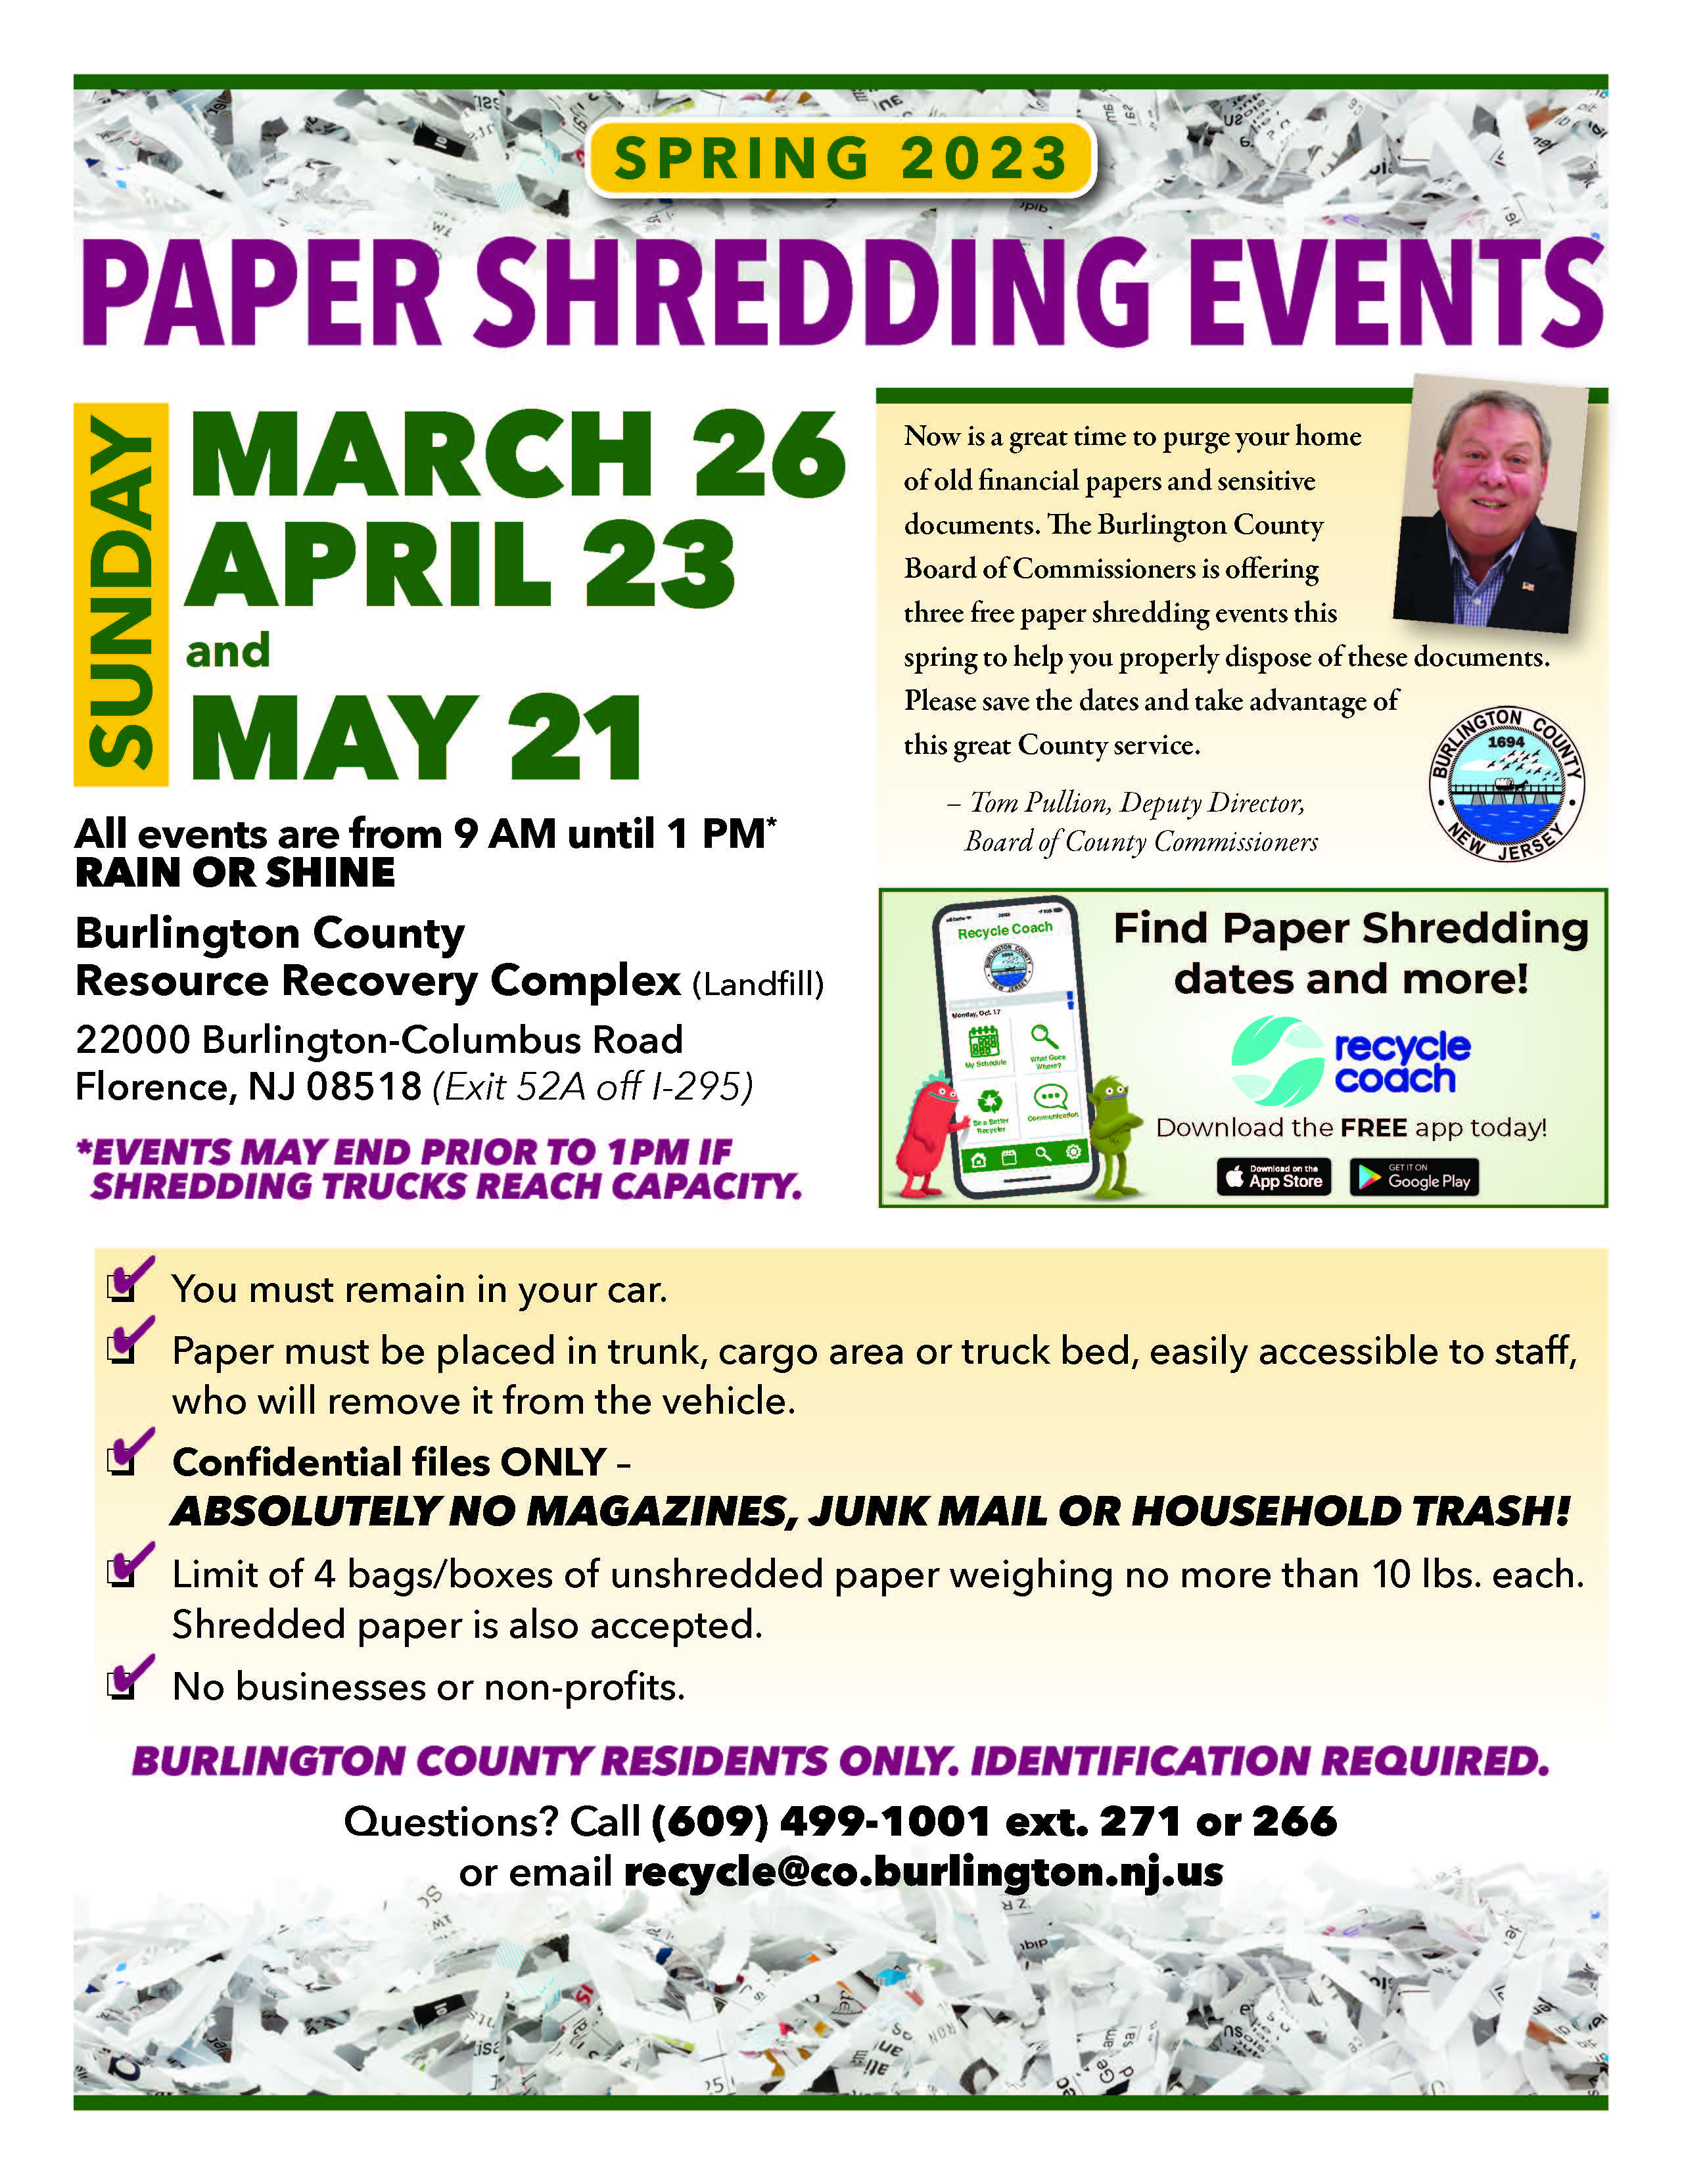 Spring 2023 Paper Shredding Events Eastampton New Jersey